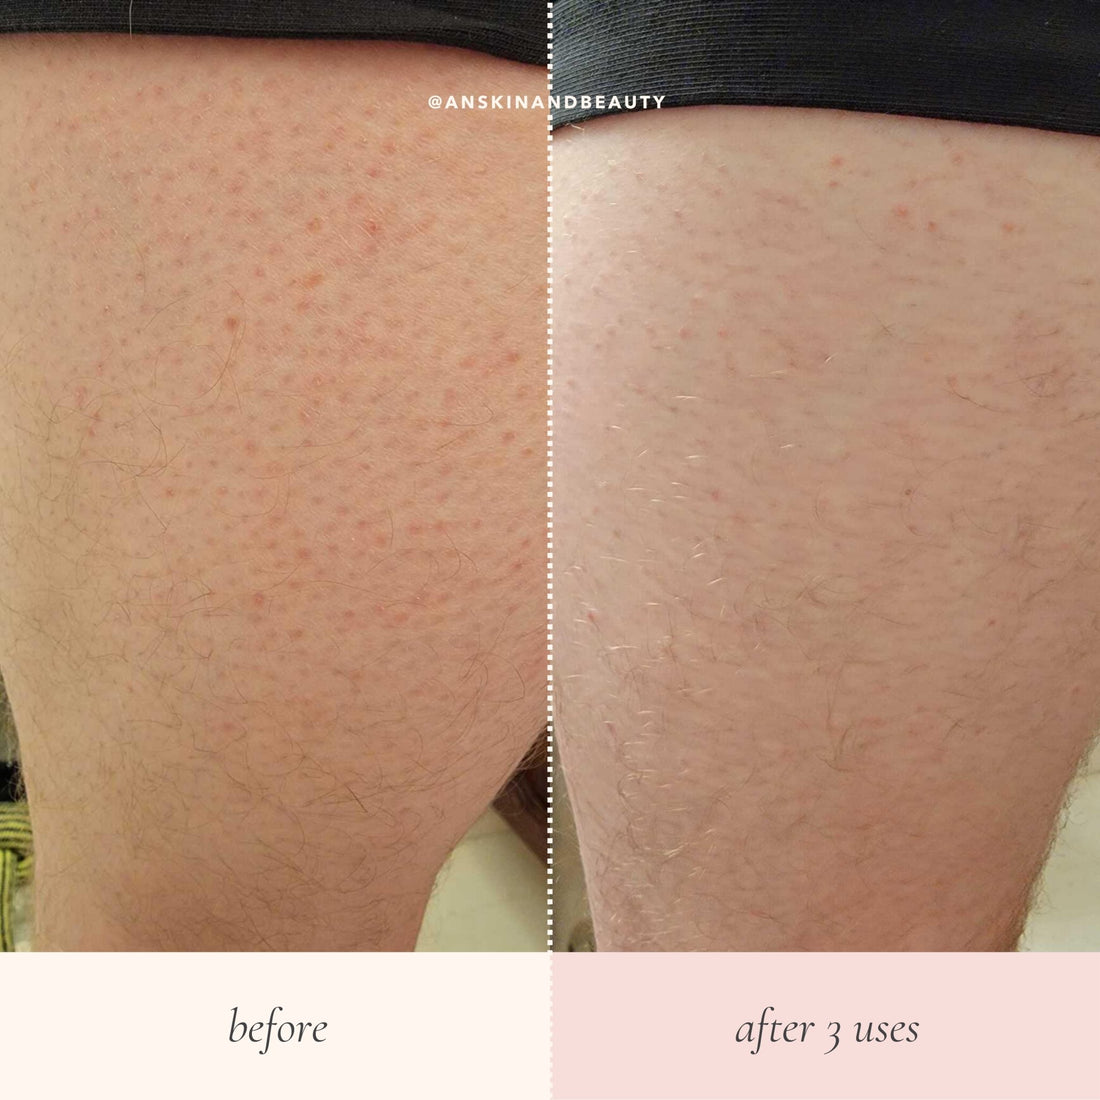 What You Should Know About Keratosis Pilaris - AN Skin & Beauty